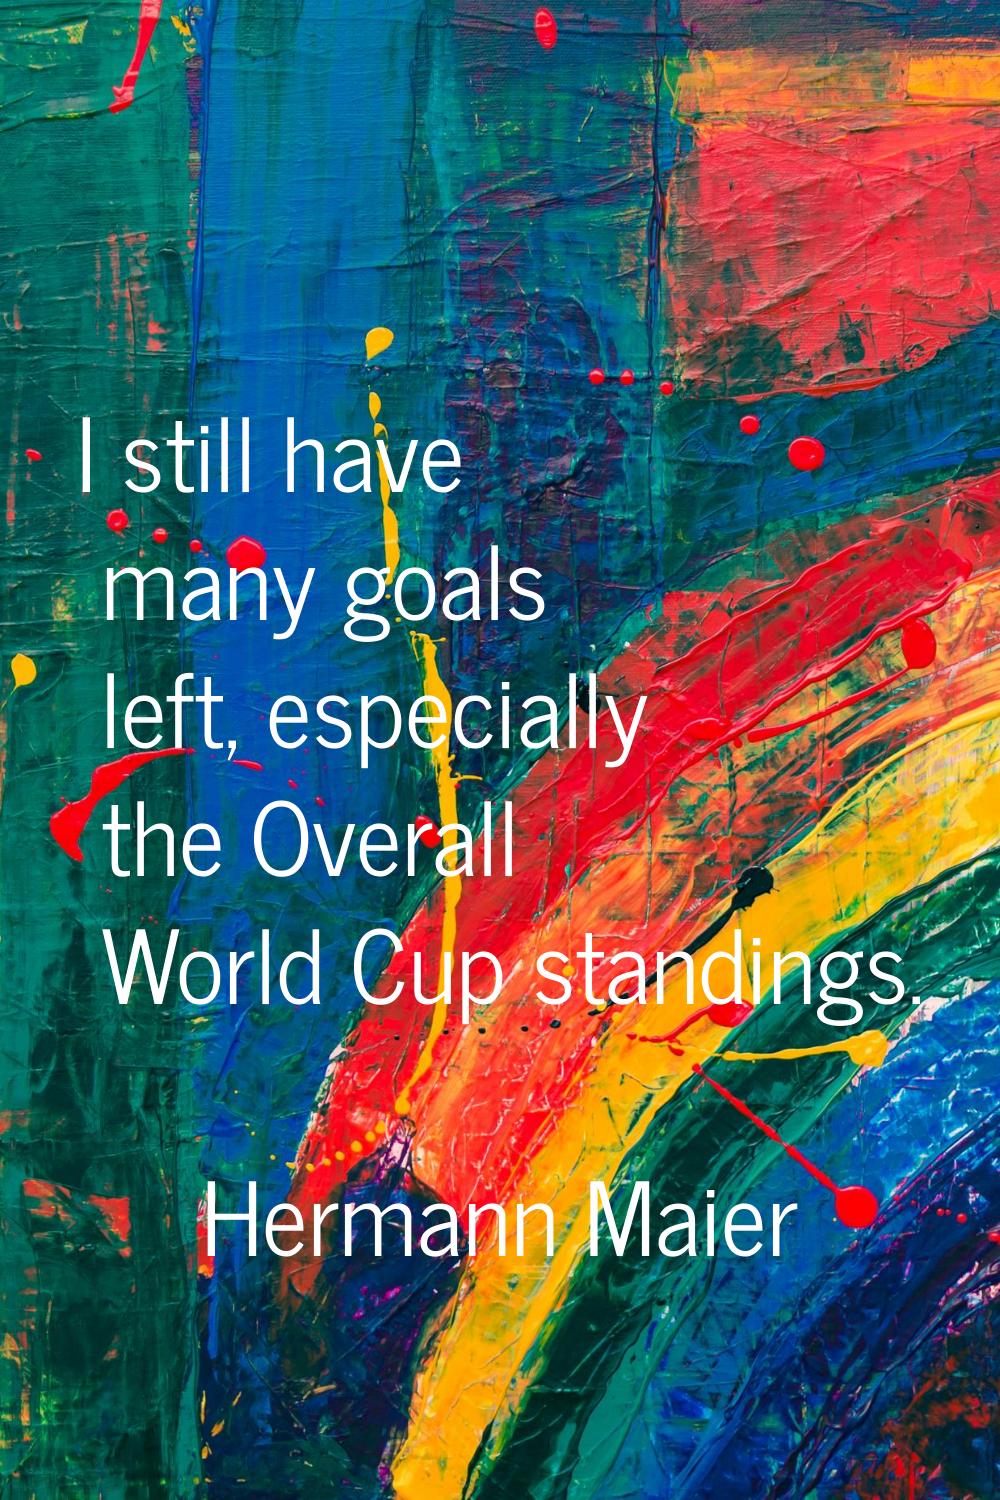 I still have many goals left, especially the Overall World Cup standings.